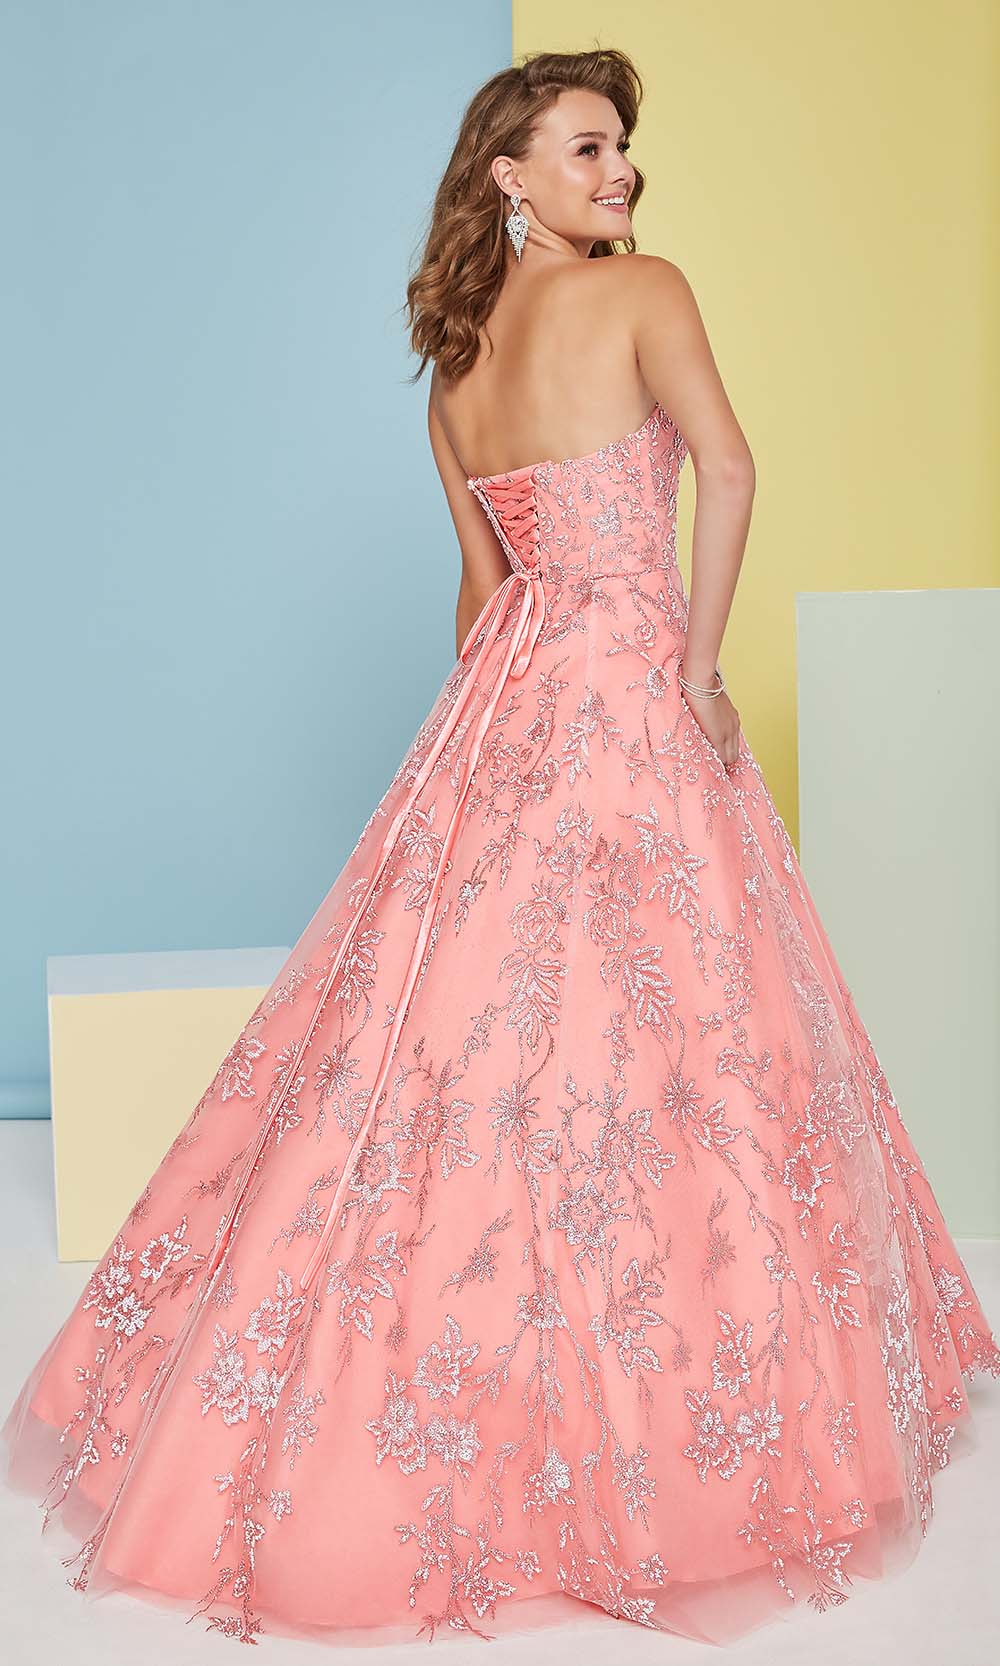 Tiffany Designs - 16471 Strapless Floral Glitter Ornate A-Line Gown Prom Dresses